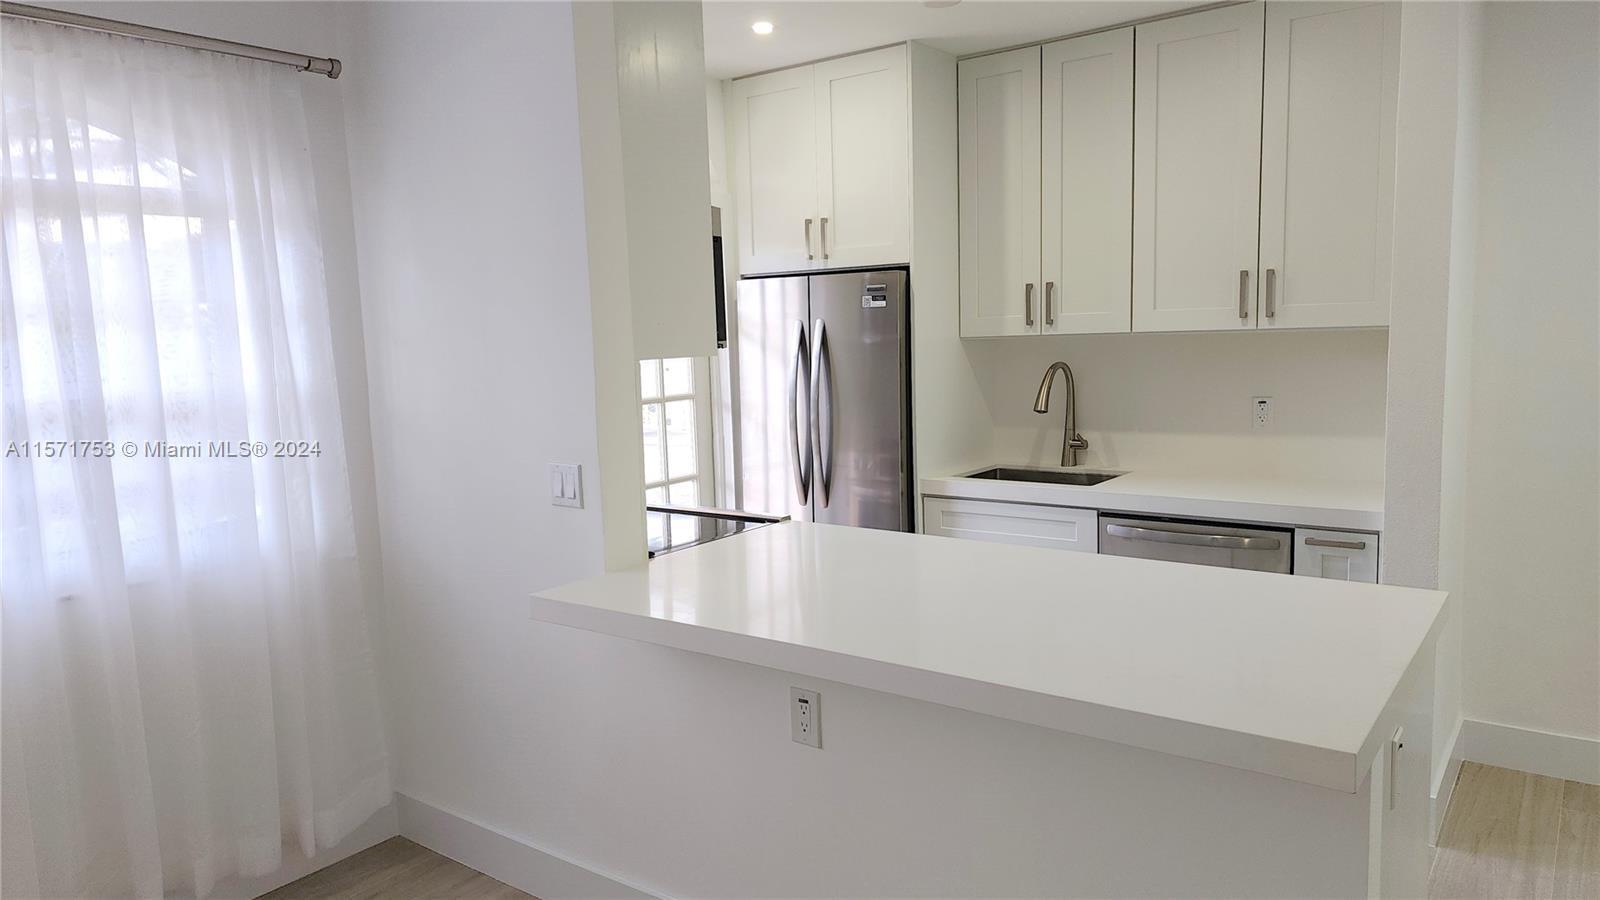 Gorgeous renovation at The Emerson House Condo! Everything is new and waiting for you just one block